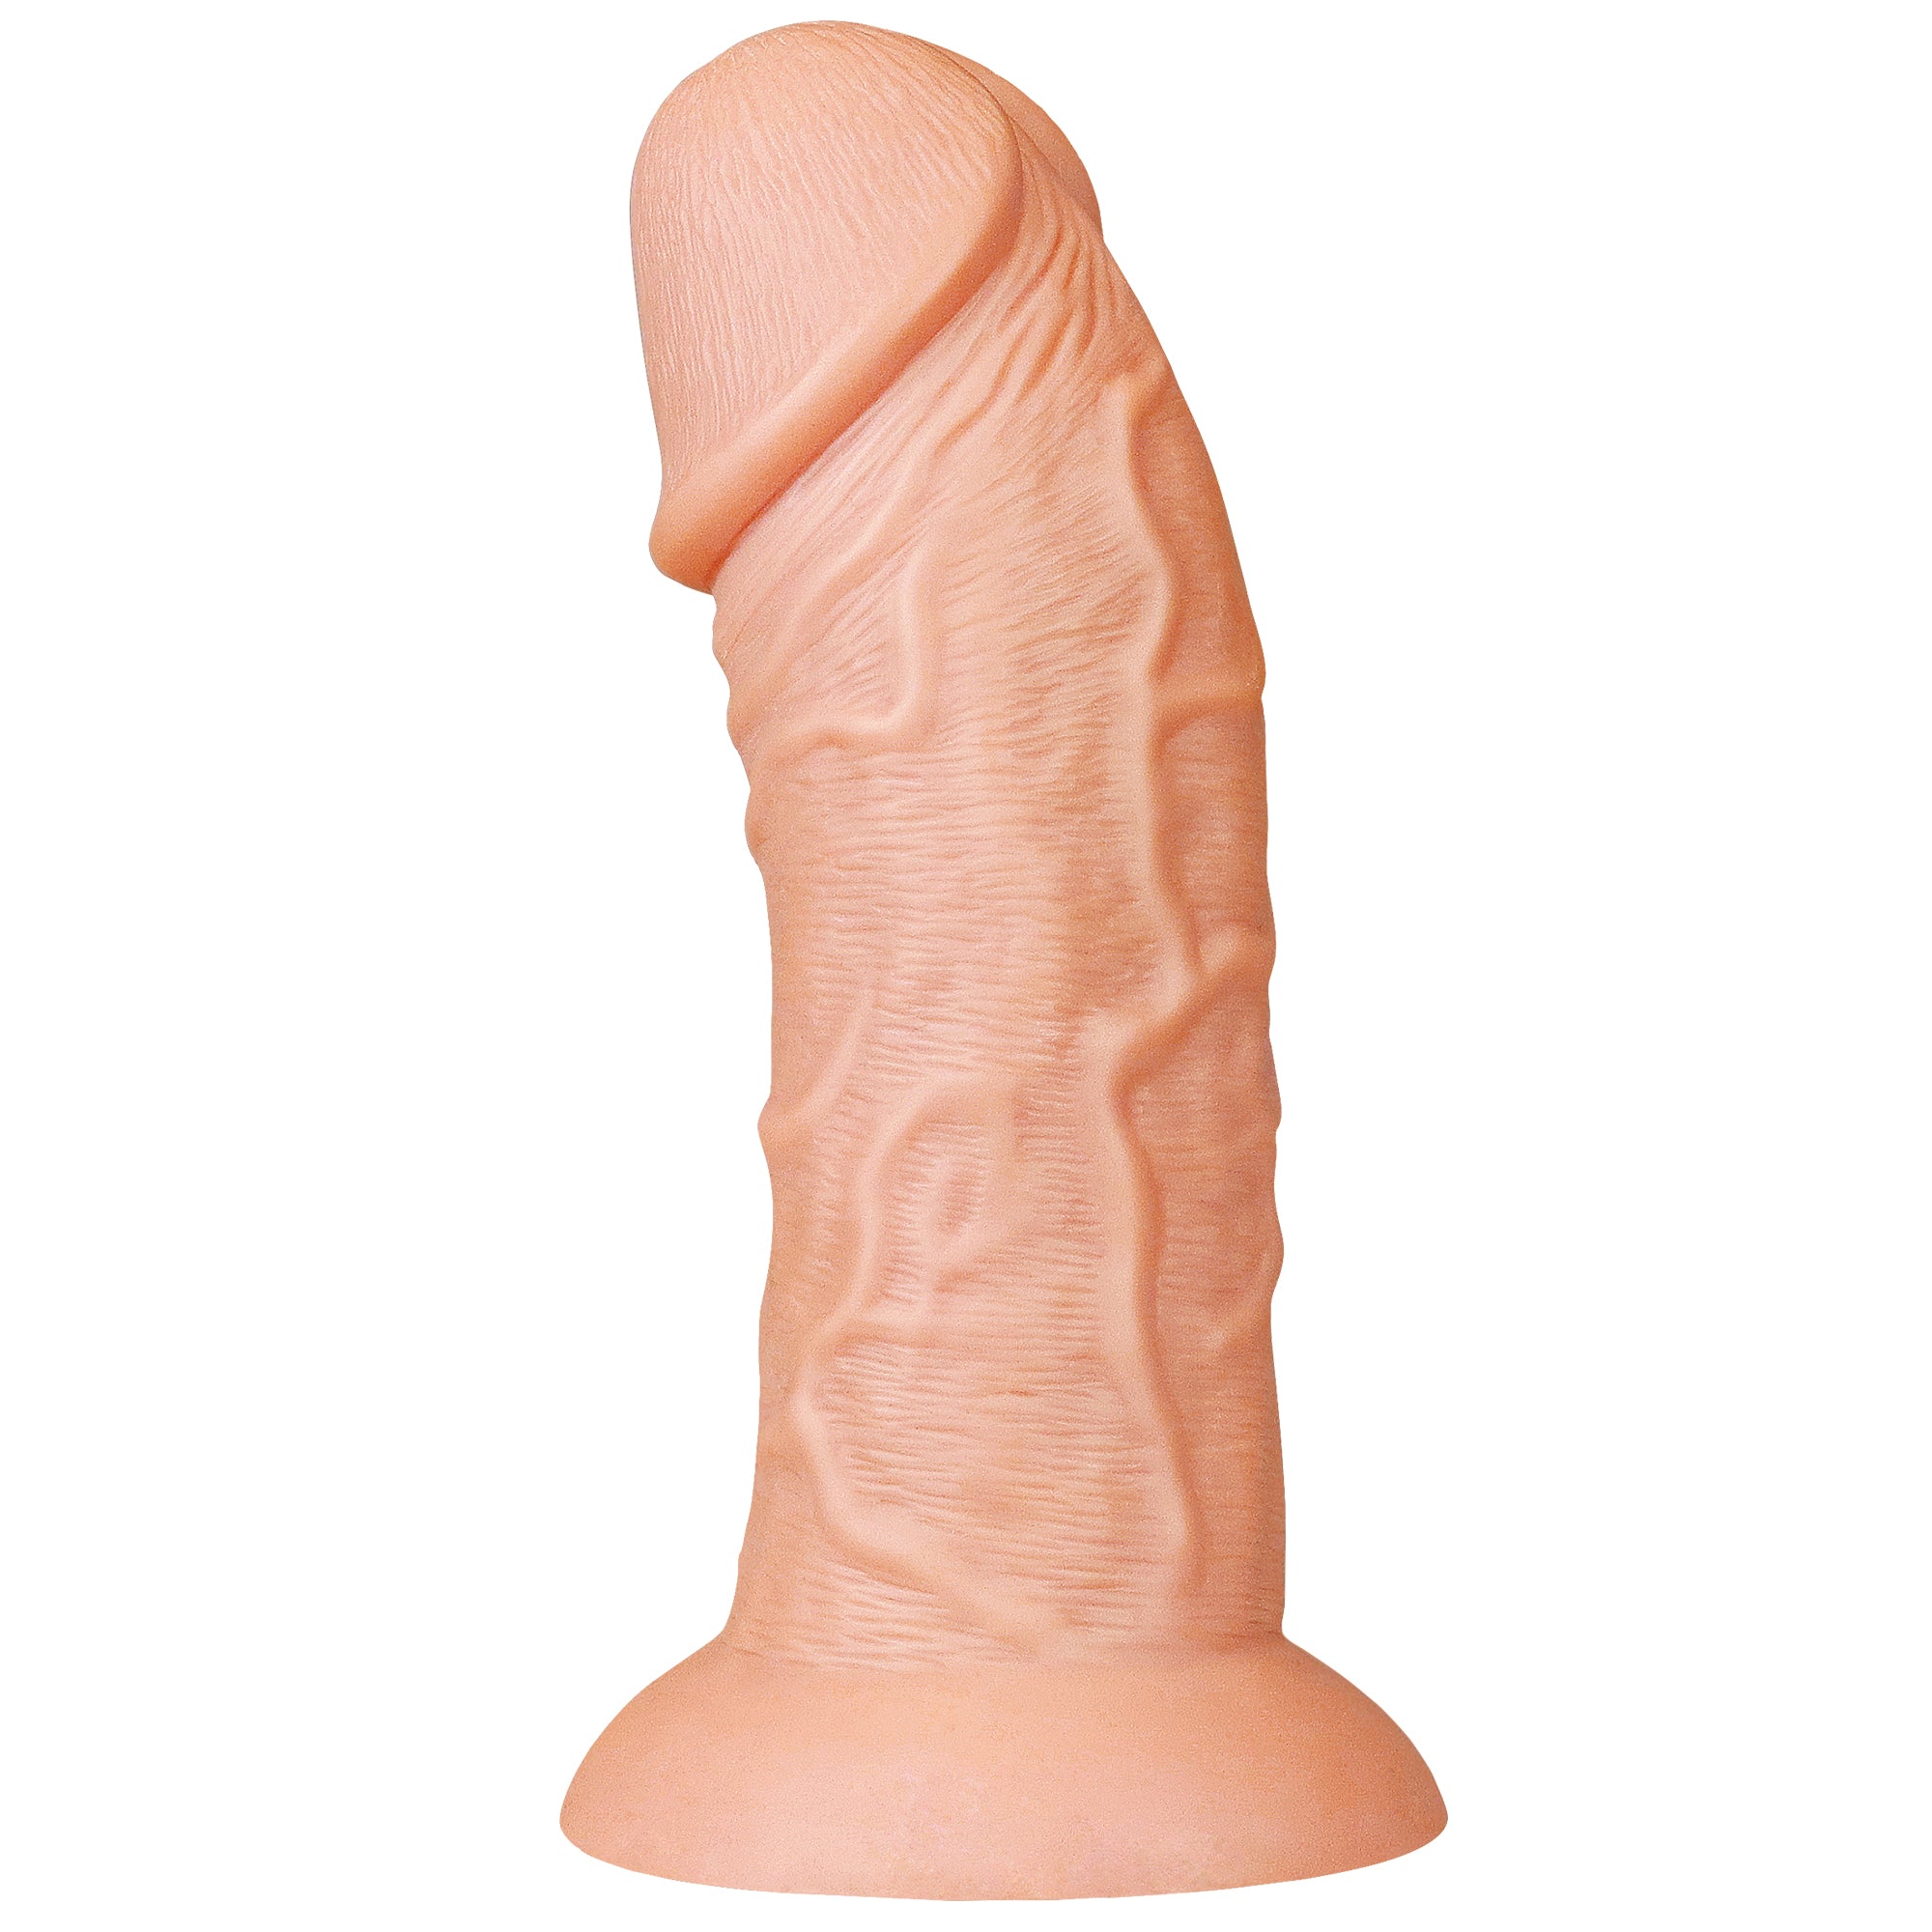 The 8.6 inches curved big dildo anal toy is upright